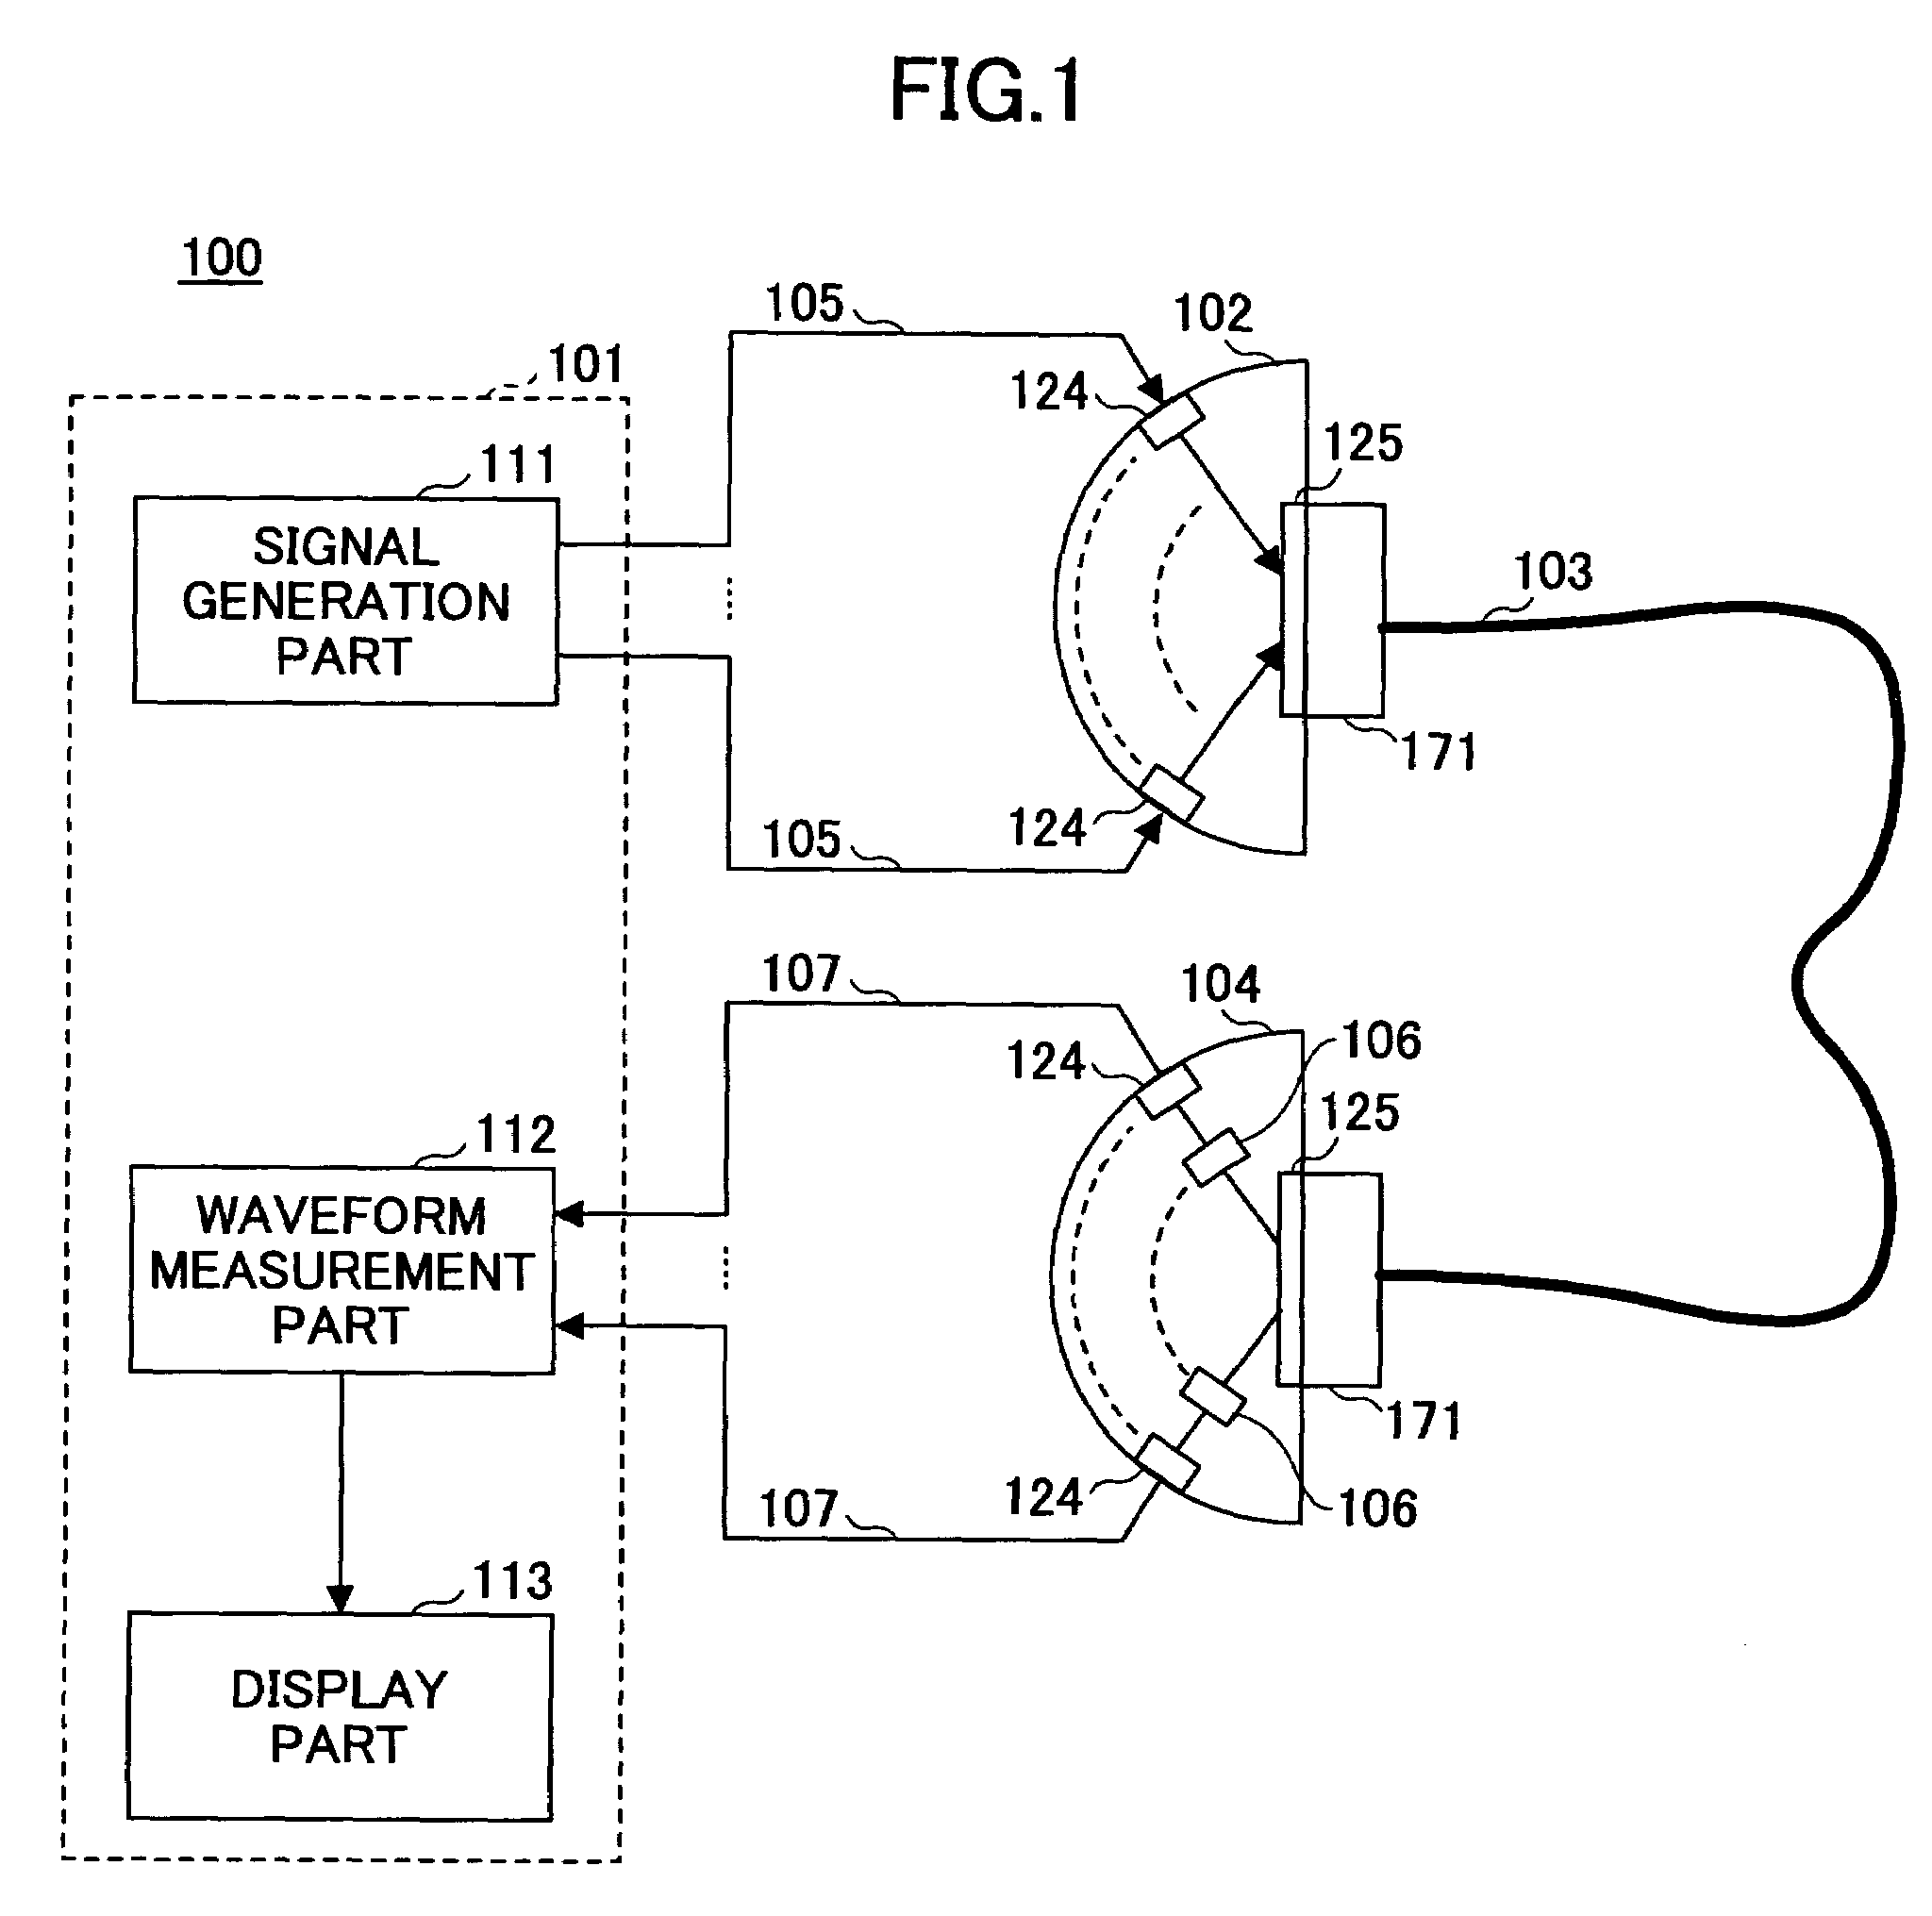 Evaluation board and cable assembly evaluation method